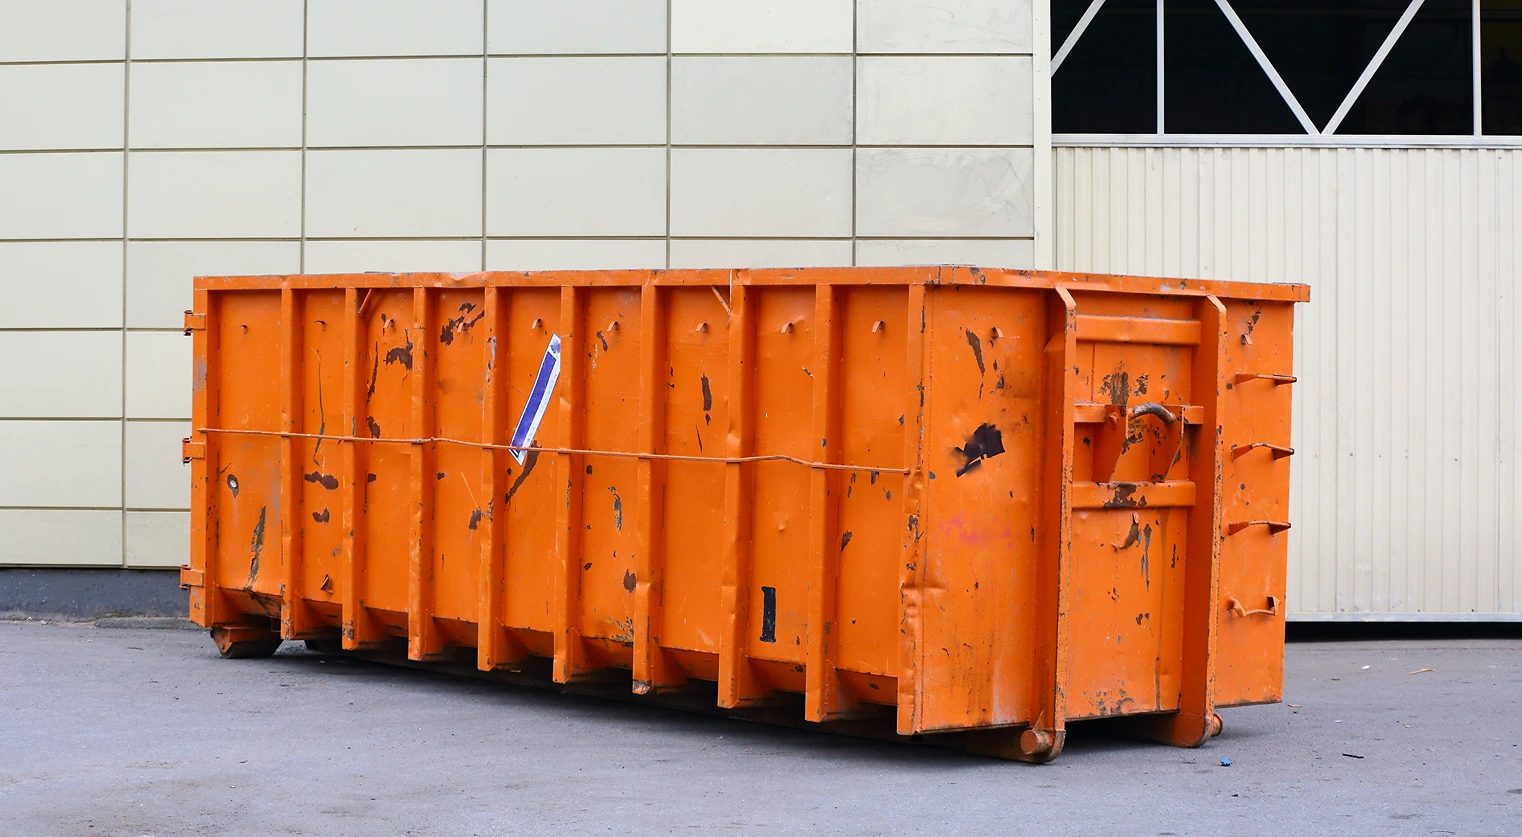 How to Use Your 10-Yard Dumpster Rental in Greer